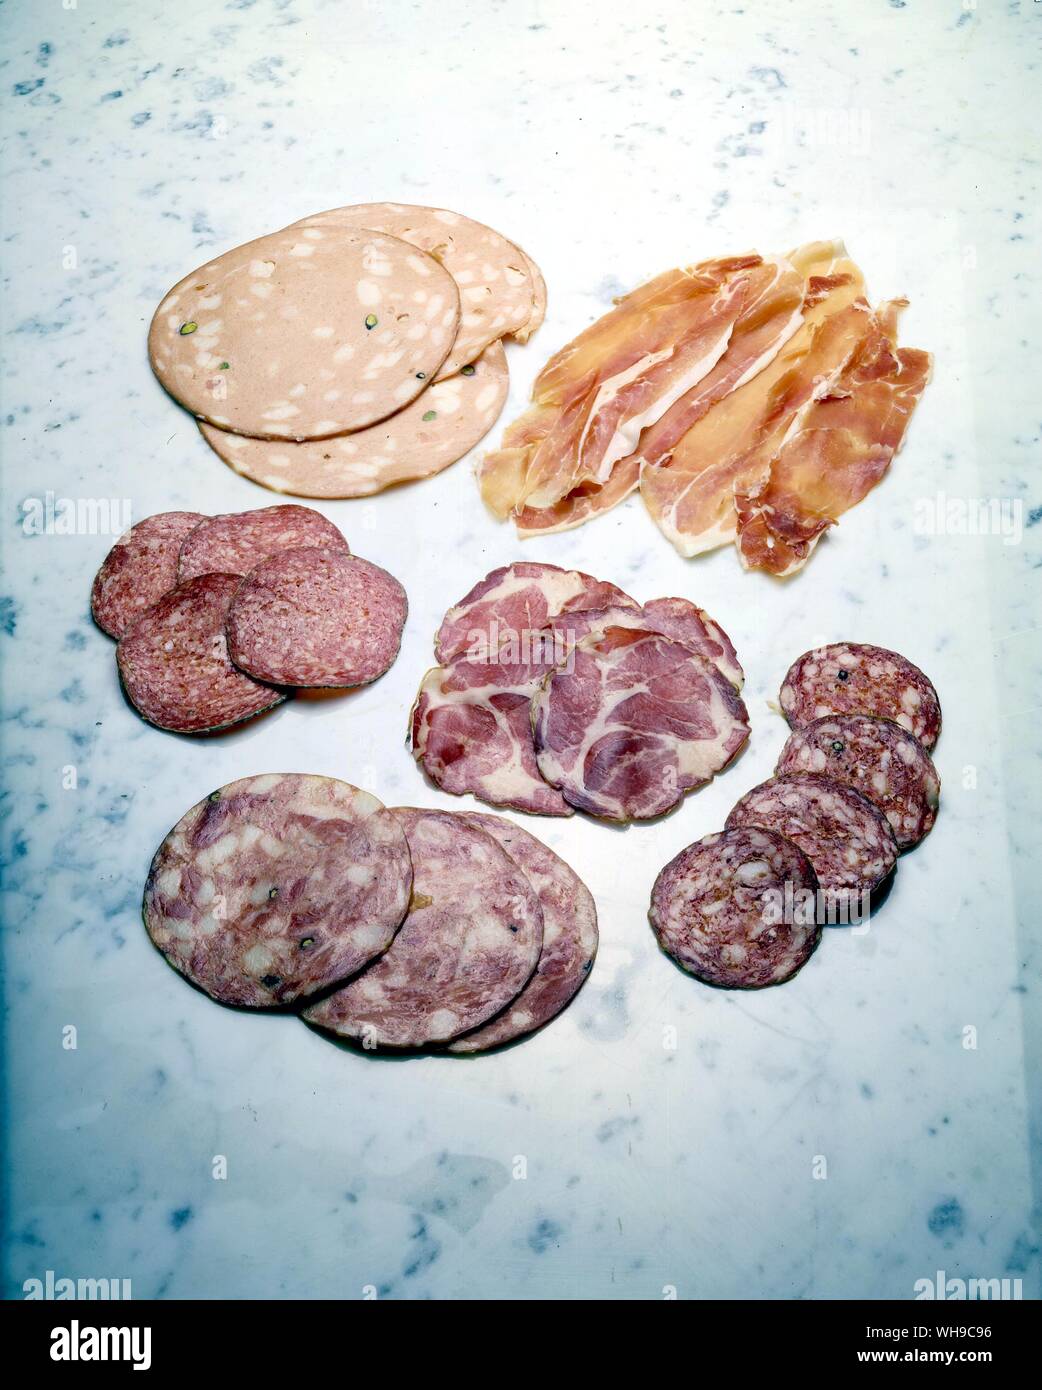 Selection of Meat Stock Photo